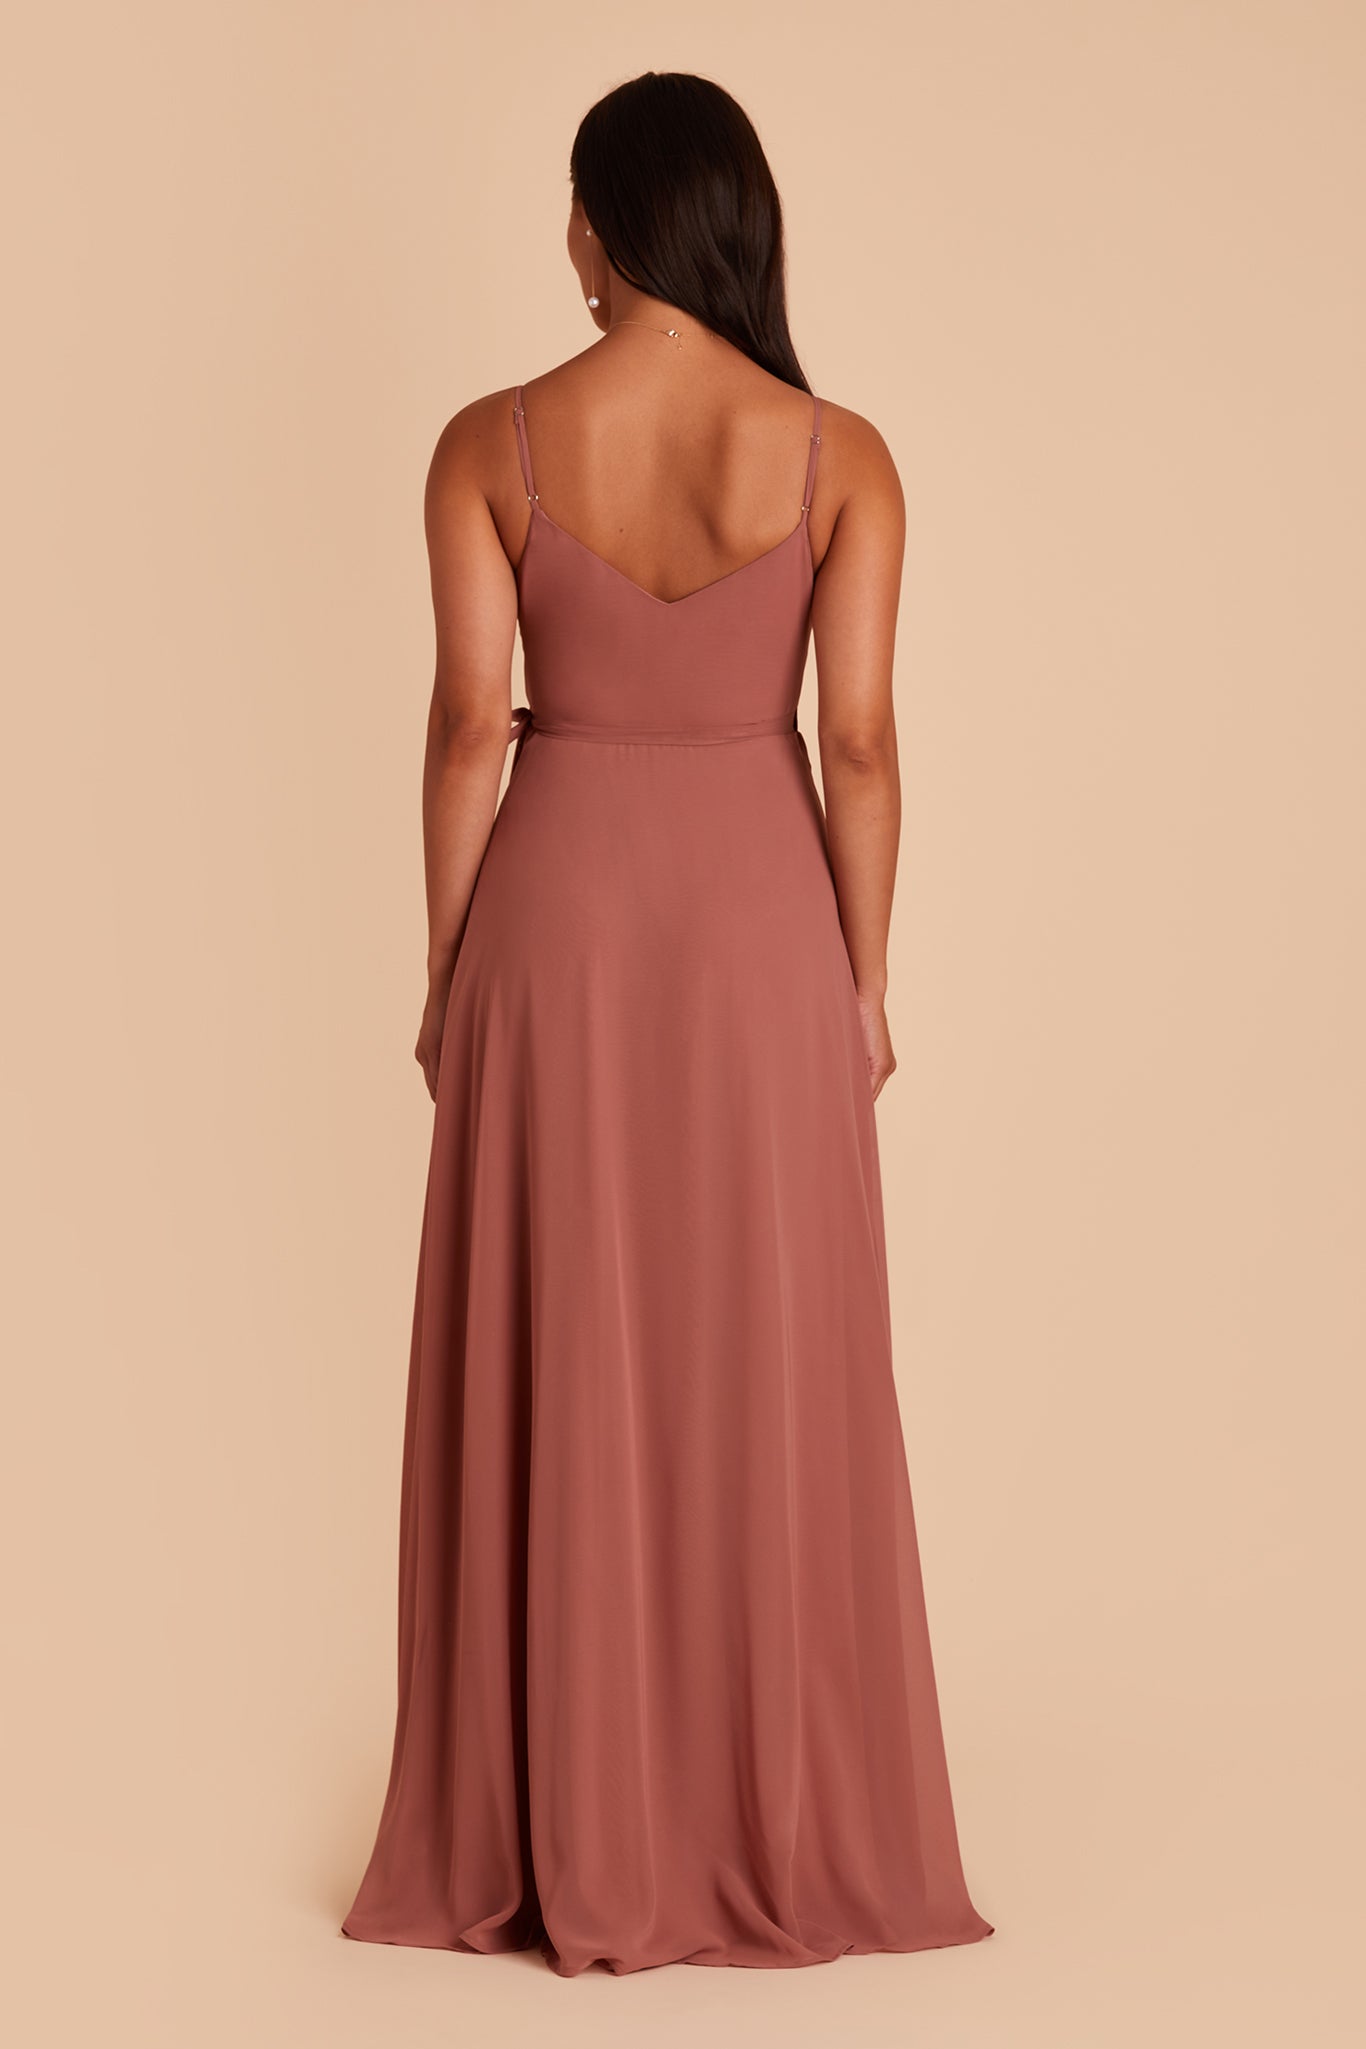 Cindy bridesmaid dress with slit in desert rose chiffon by Birdy Grey, back view